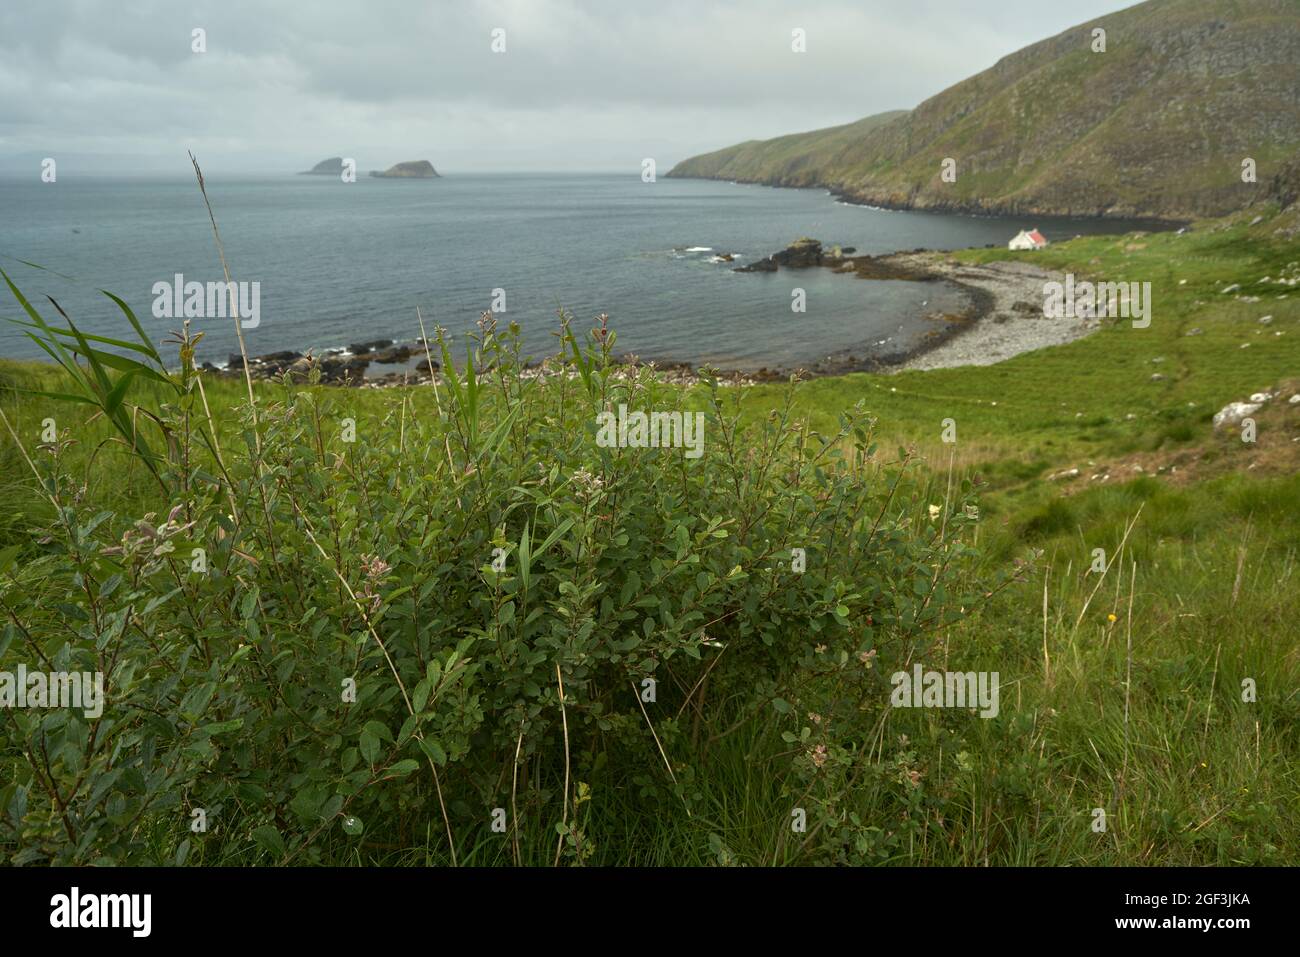 The house or bothy on Eilean an Taighe in the Shiant Isles with mixed vegetation that has resisted grazing pressure by sheep in the foreground. Stock Photo